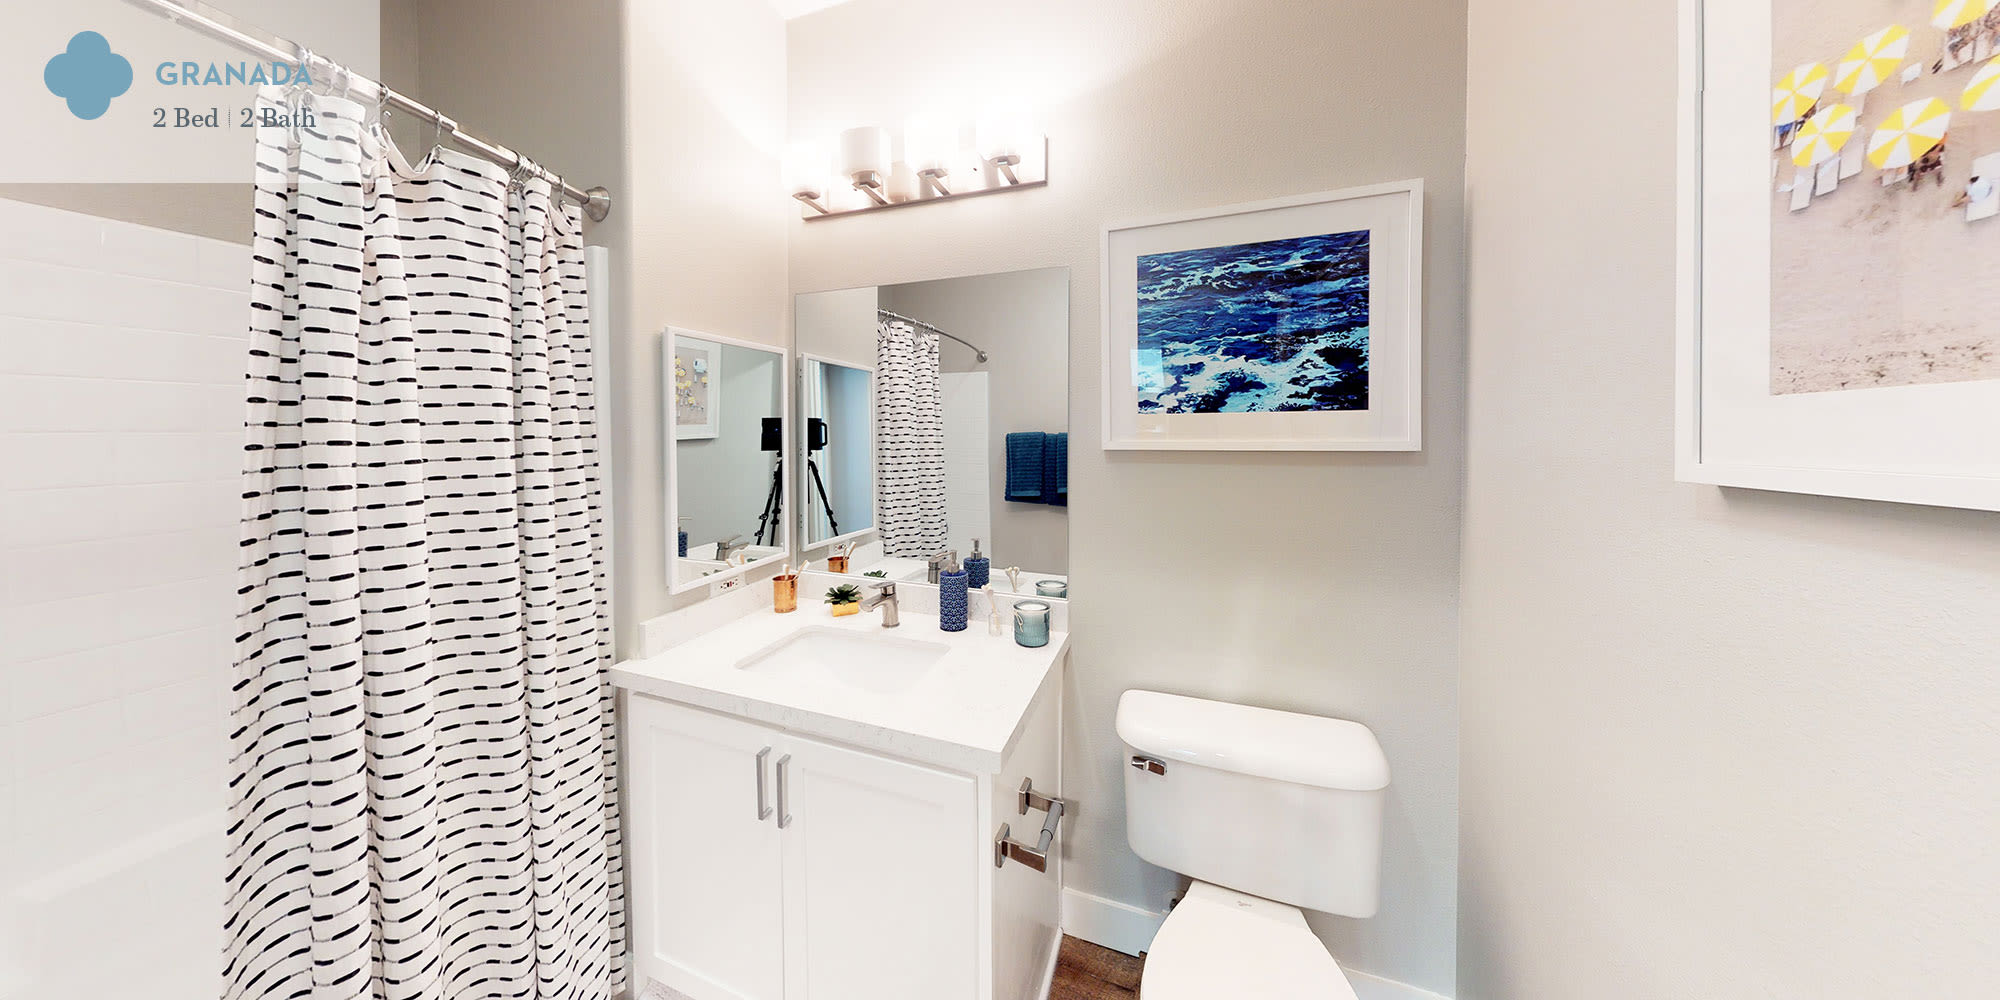 Bathroom in a two-bedroom apartment home at Mission Hills in Camarillo, California